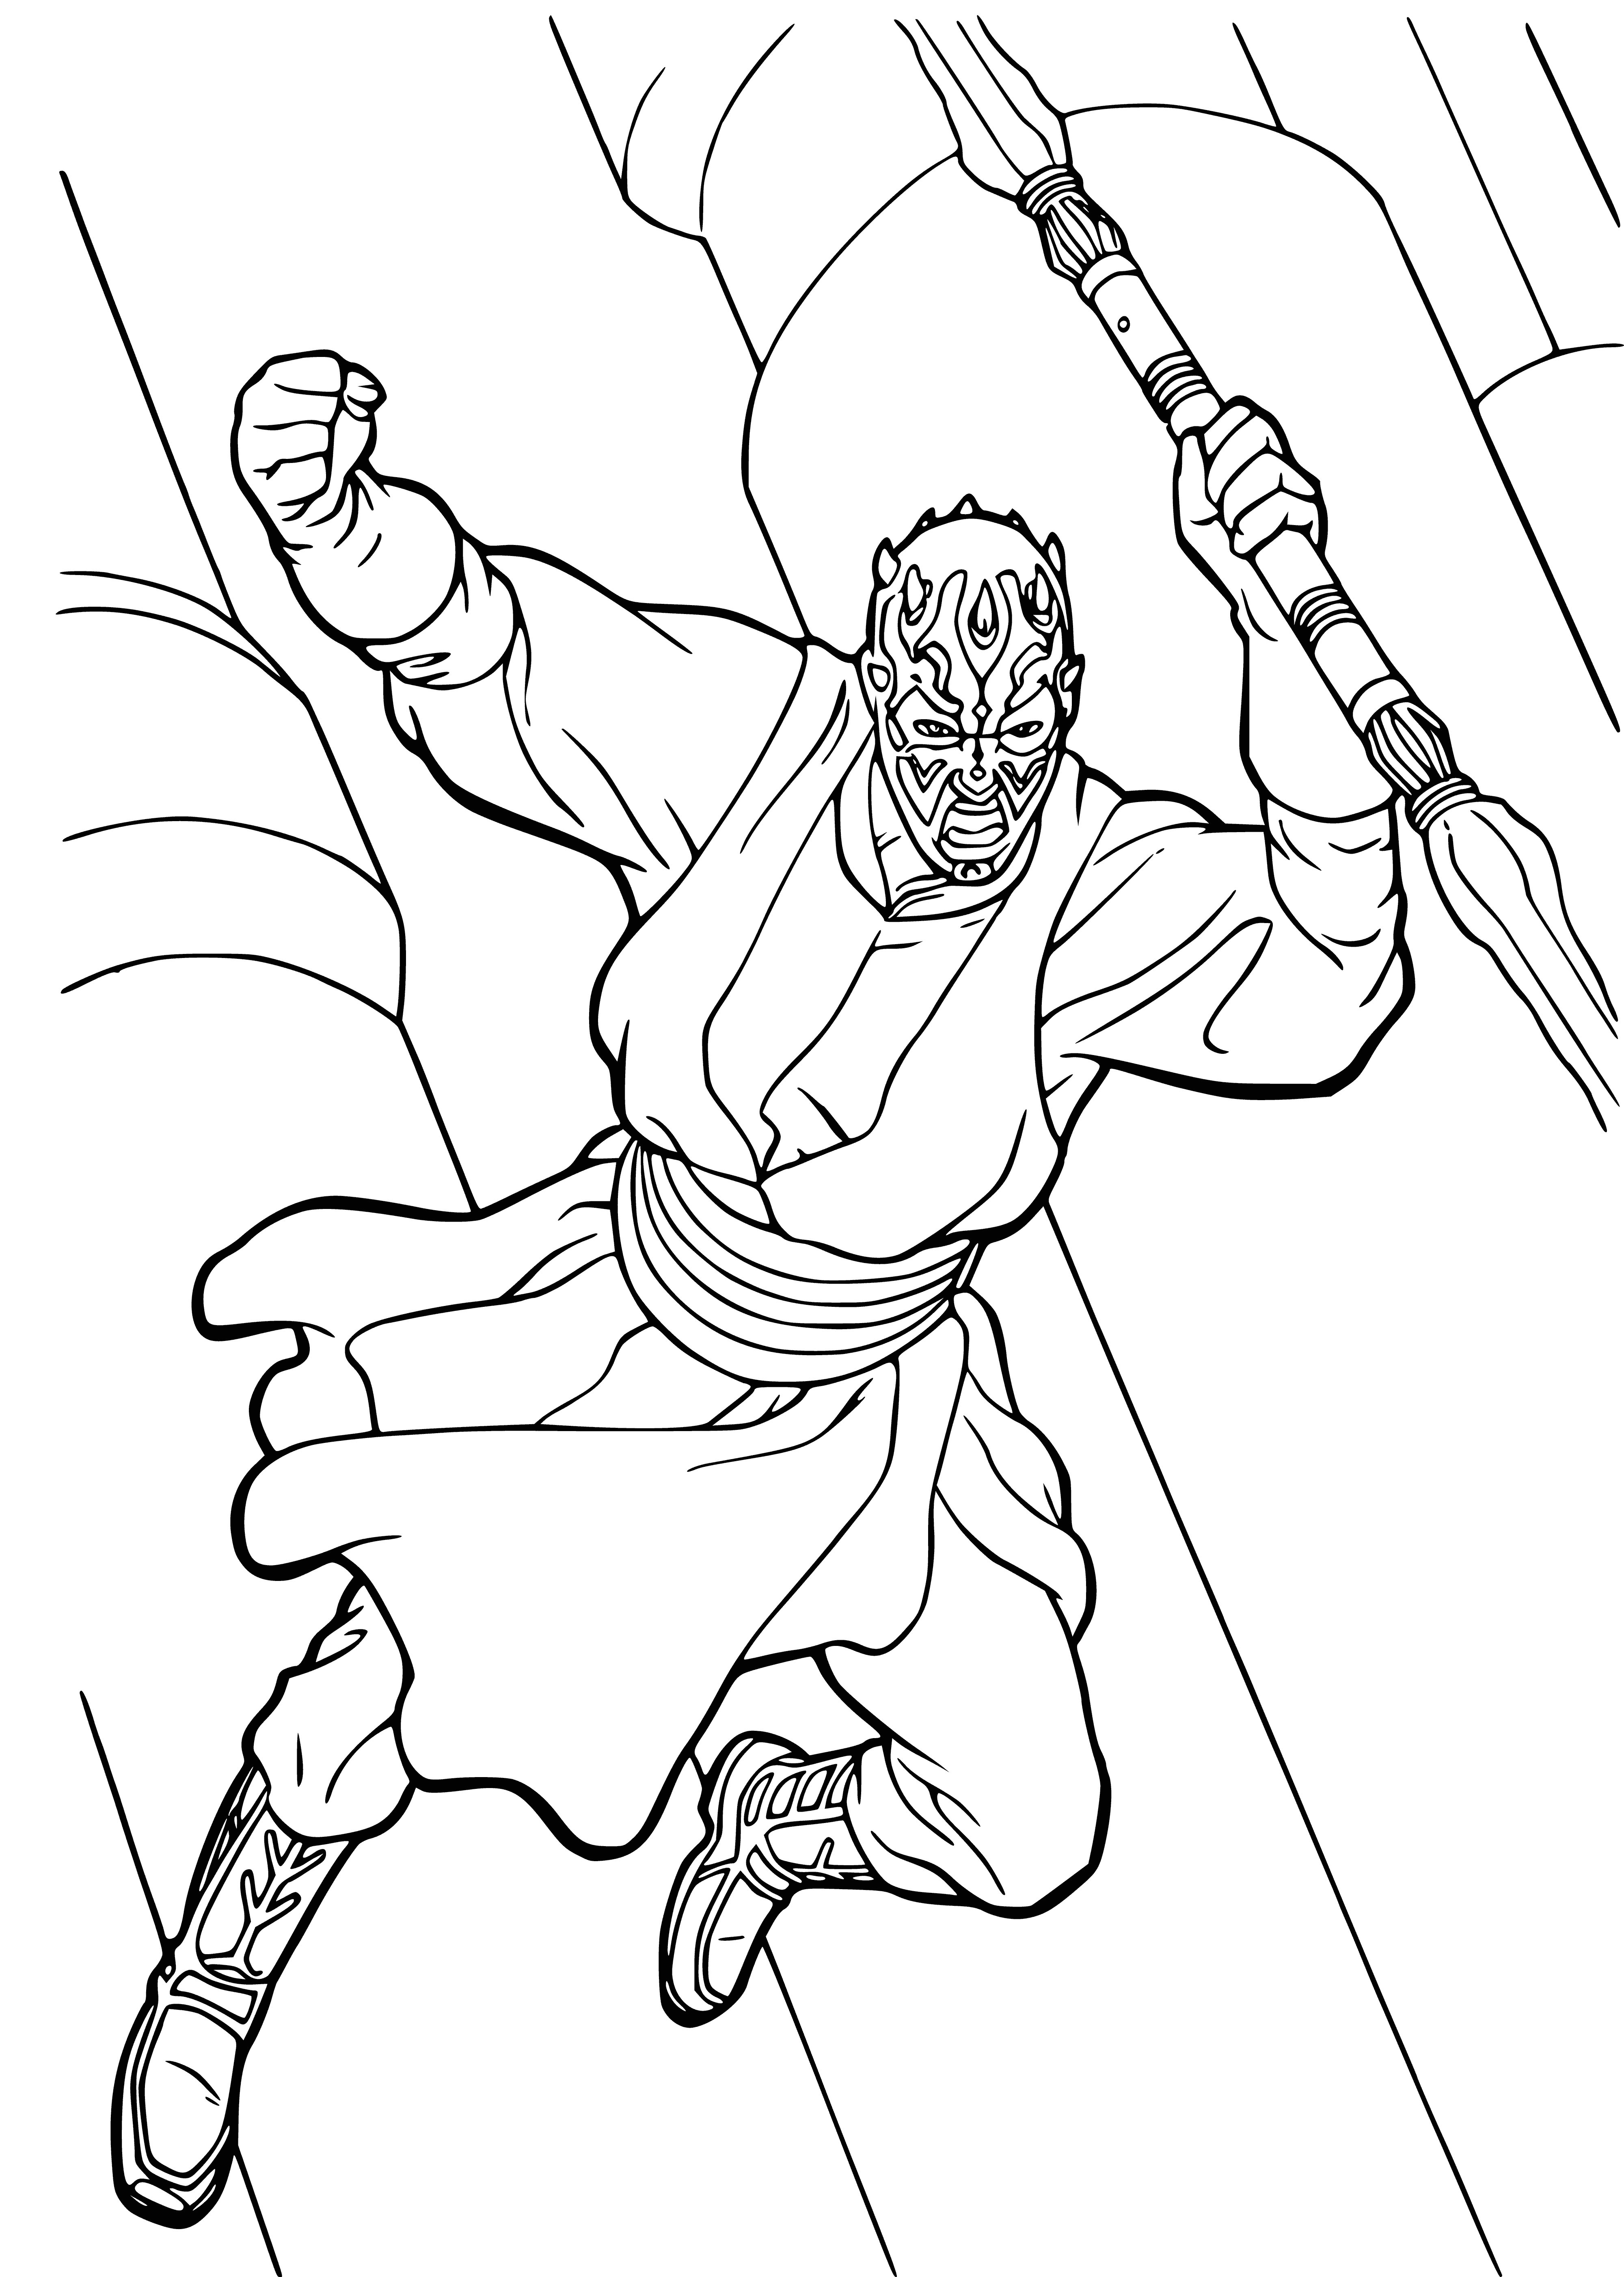 coloring page: Masked figure in black robes w/ lightsaber fights fair-haired man in white & alien w/ green lightsabers in background.